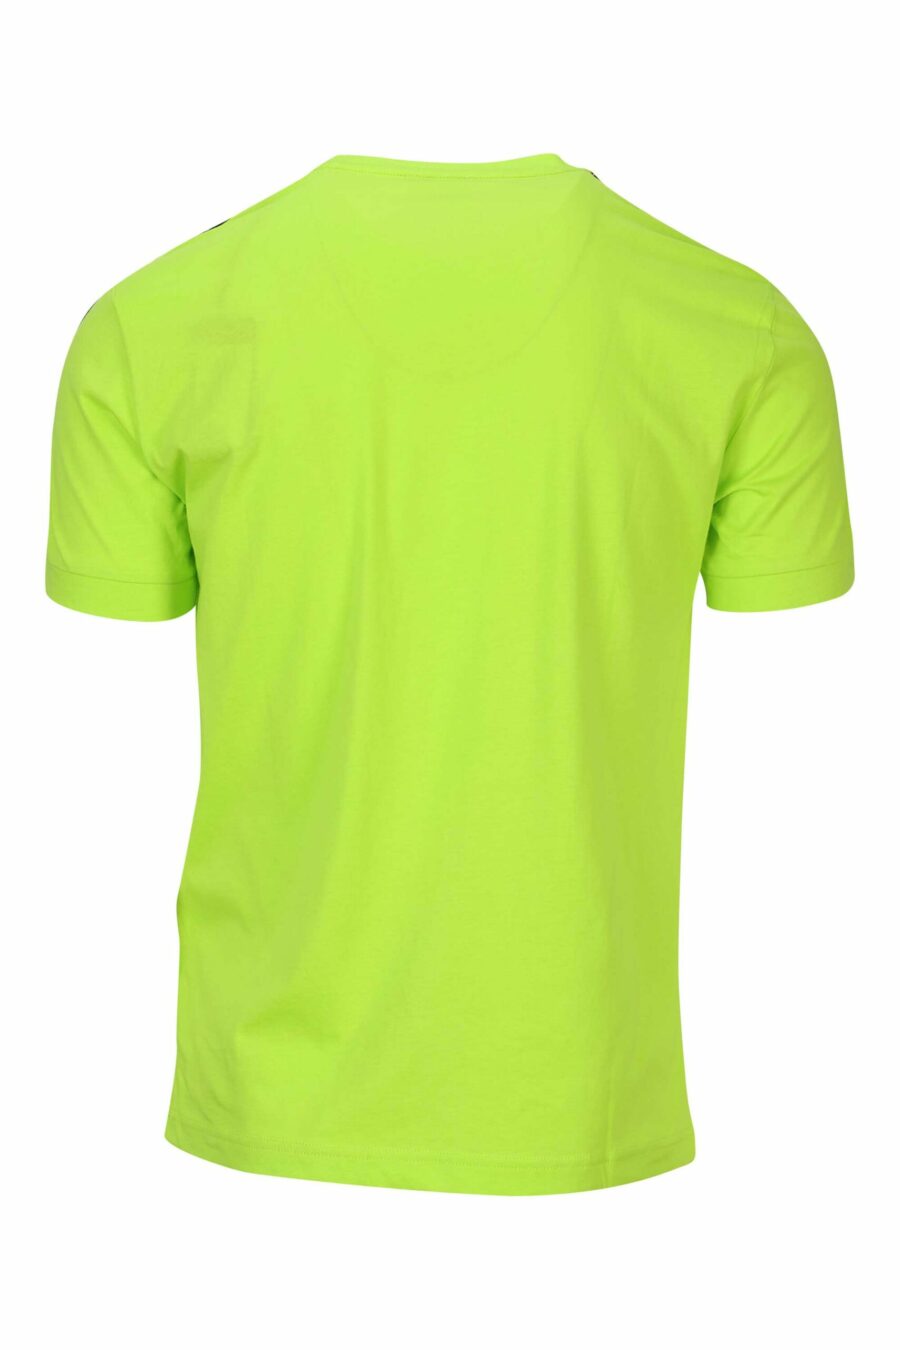 Lime green T-shirt with black "lux identity" mini-logo tape - 8058947490943 1 scaled